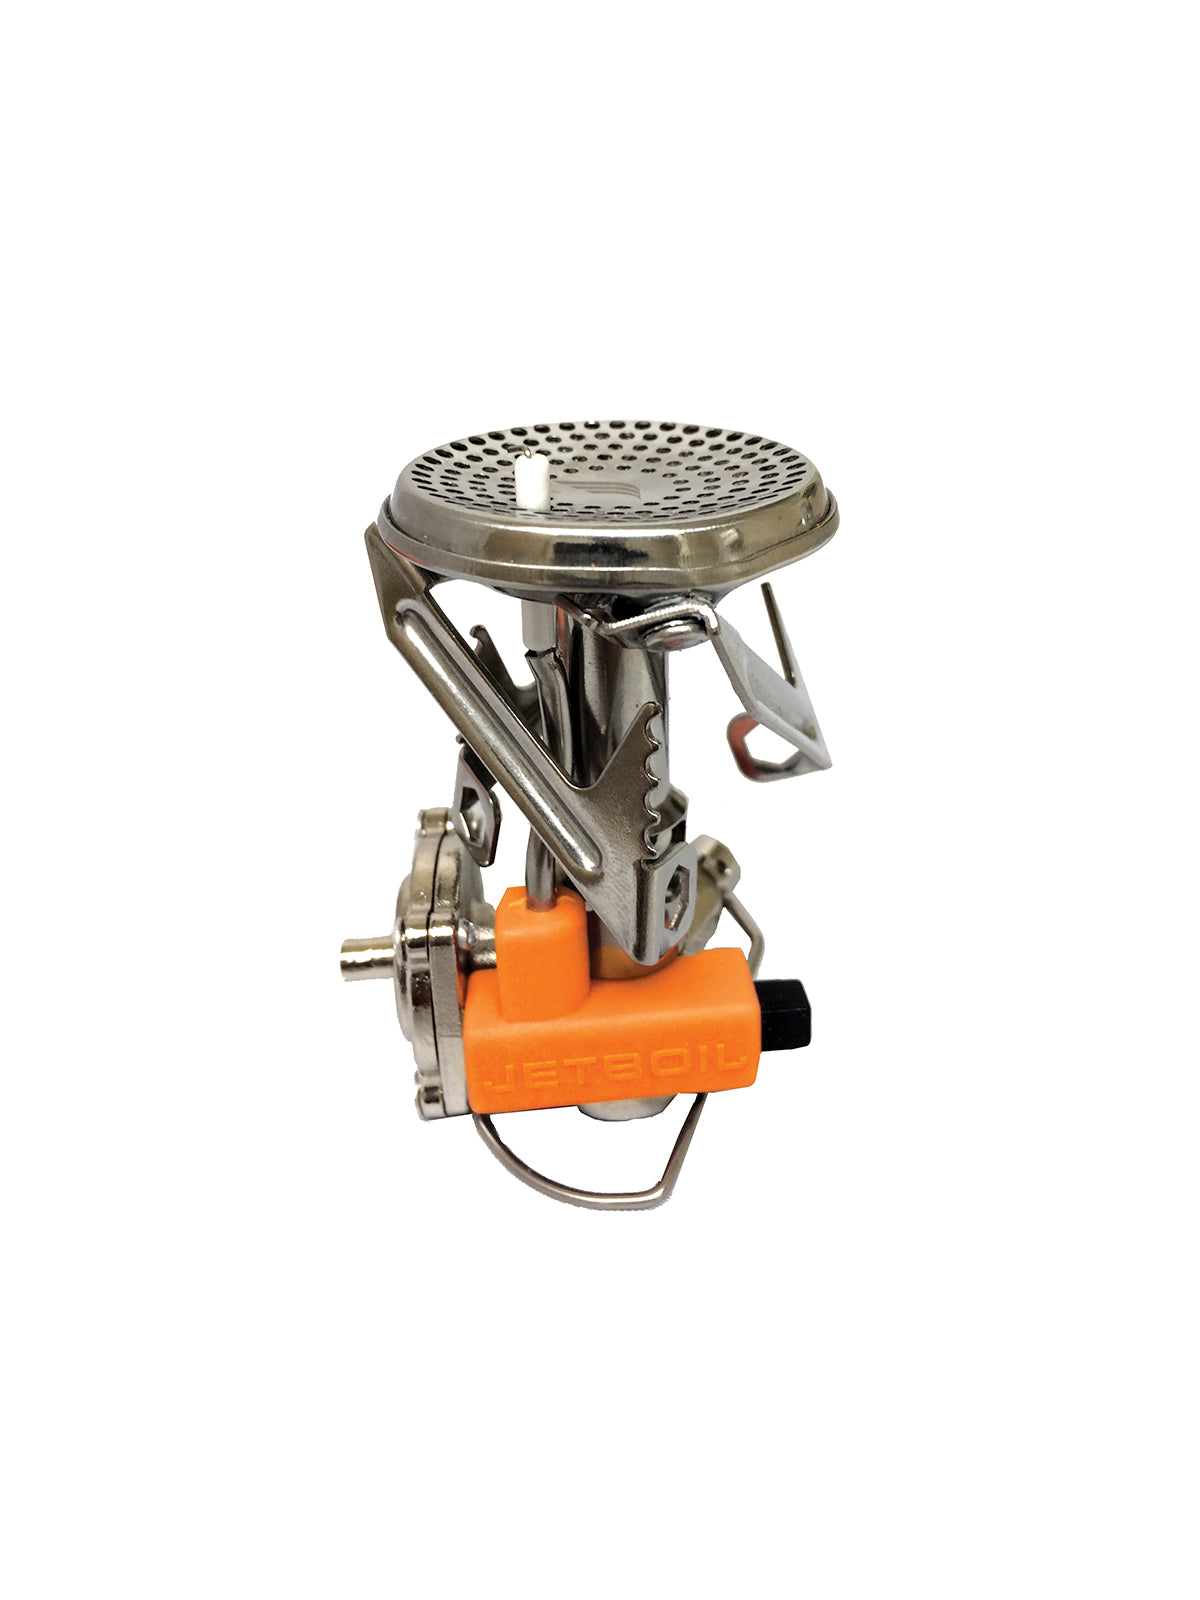 folded Jetboil MIGHTYMO Stove